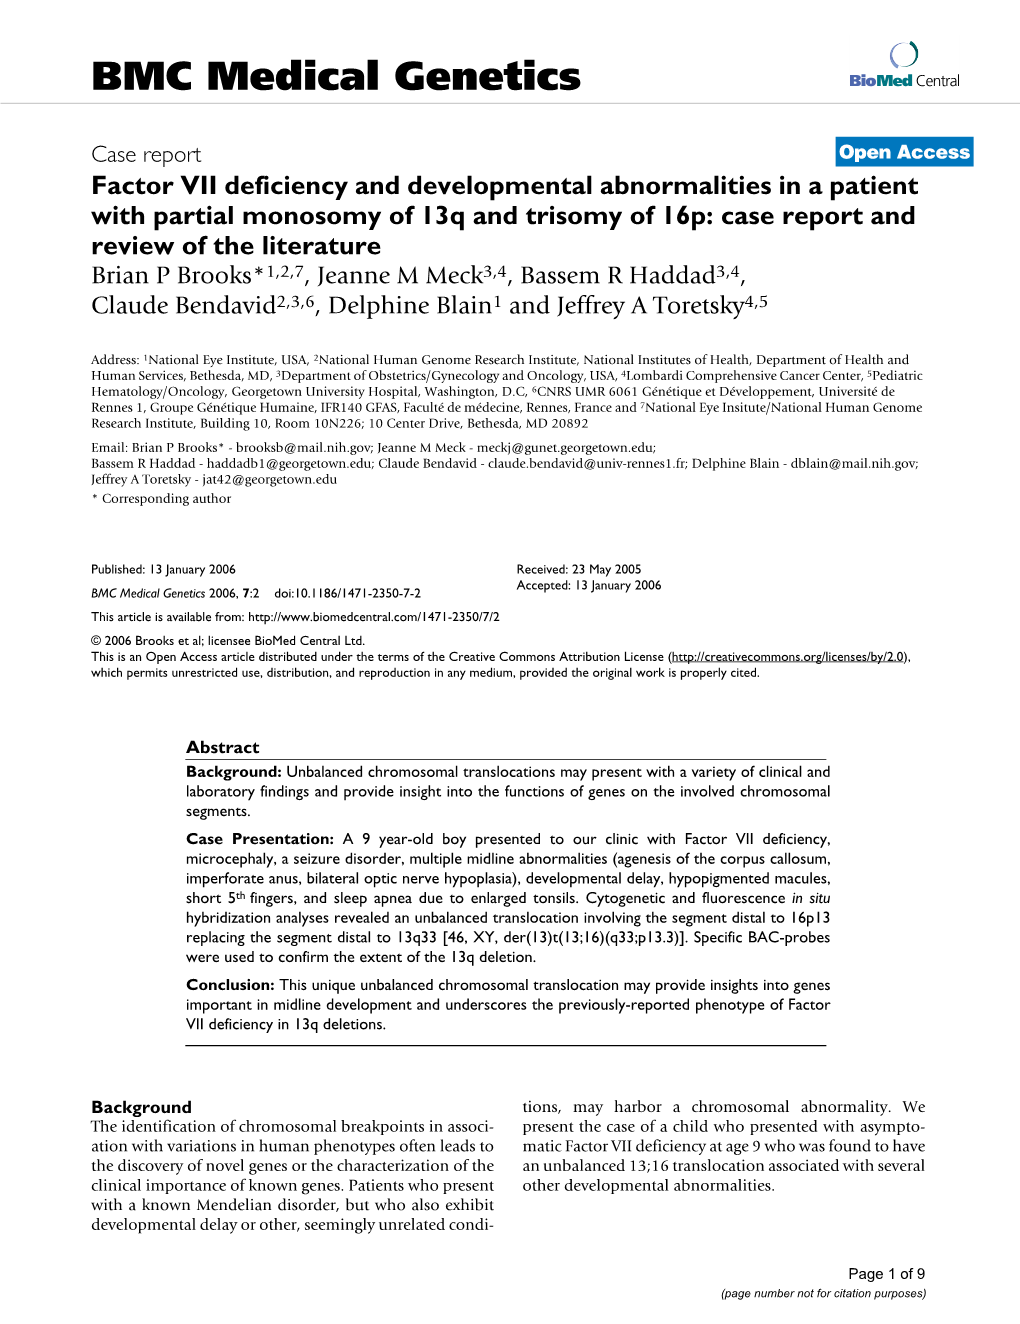 Factor VII Deficiency and Developmental Abnormalities in A